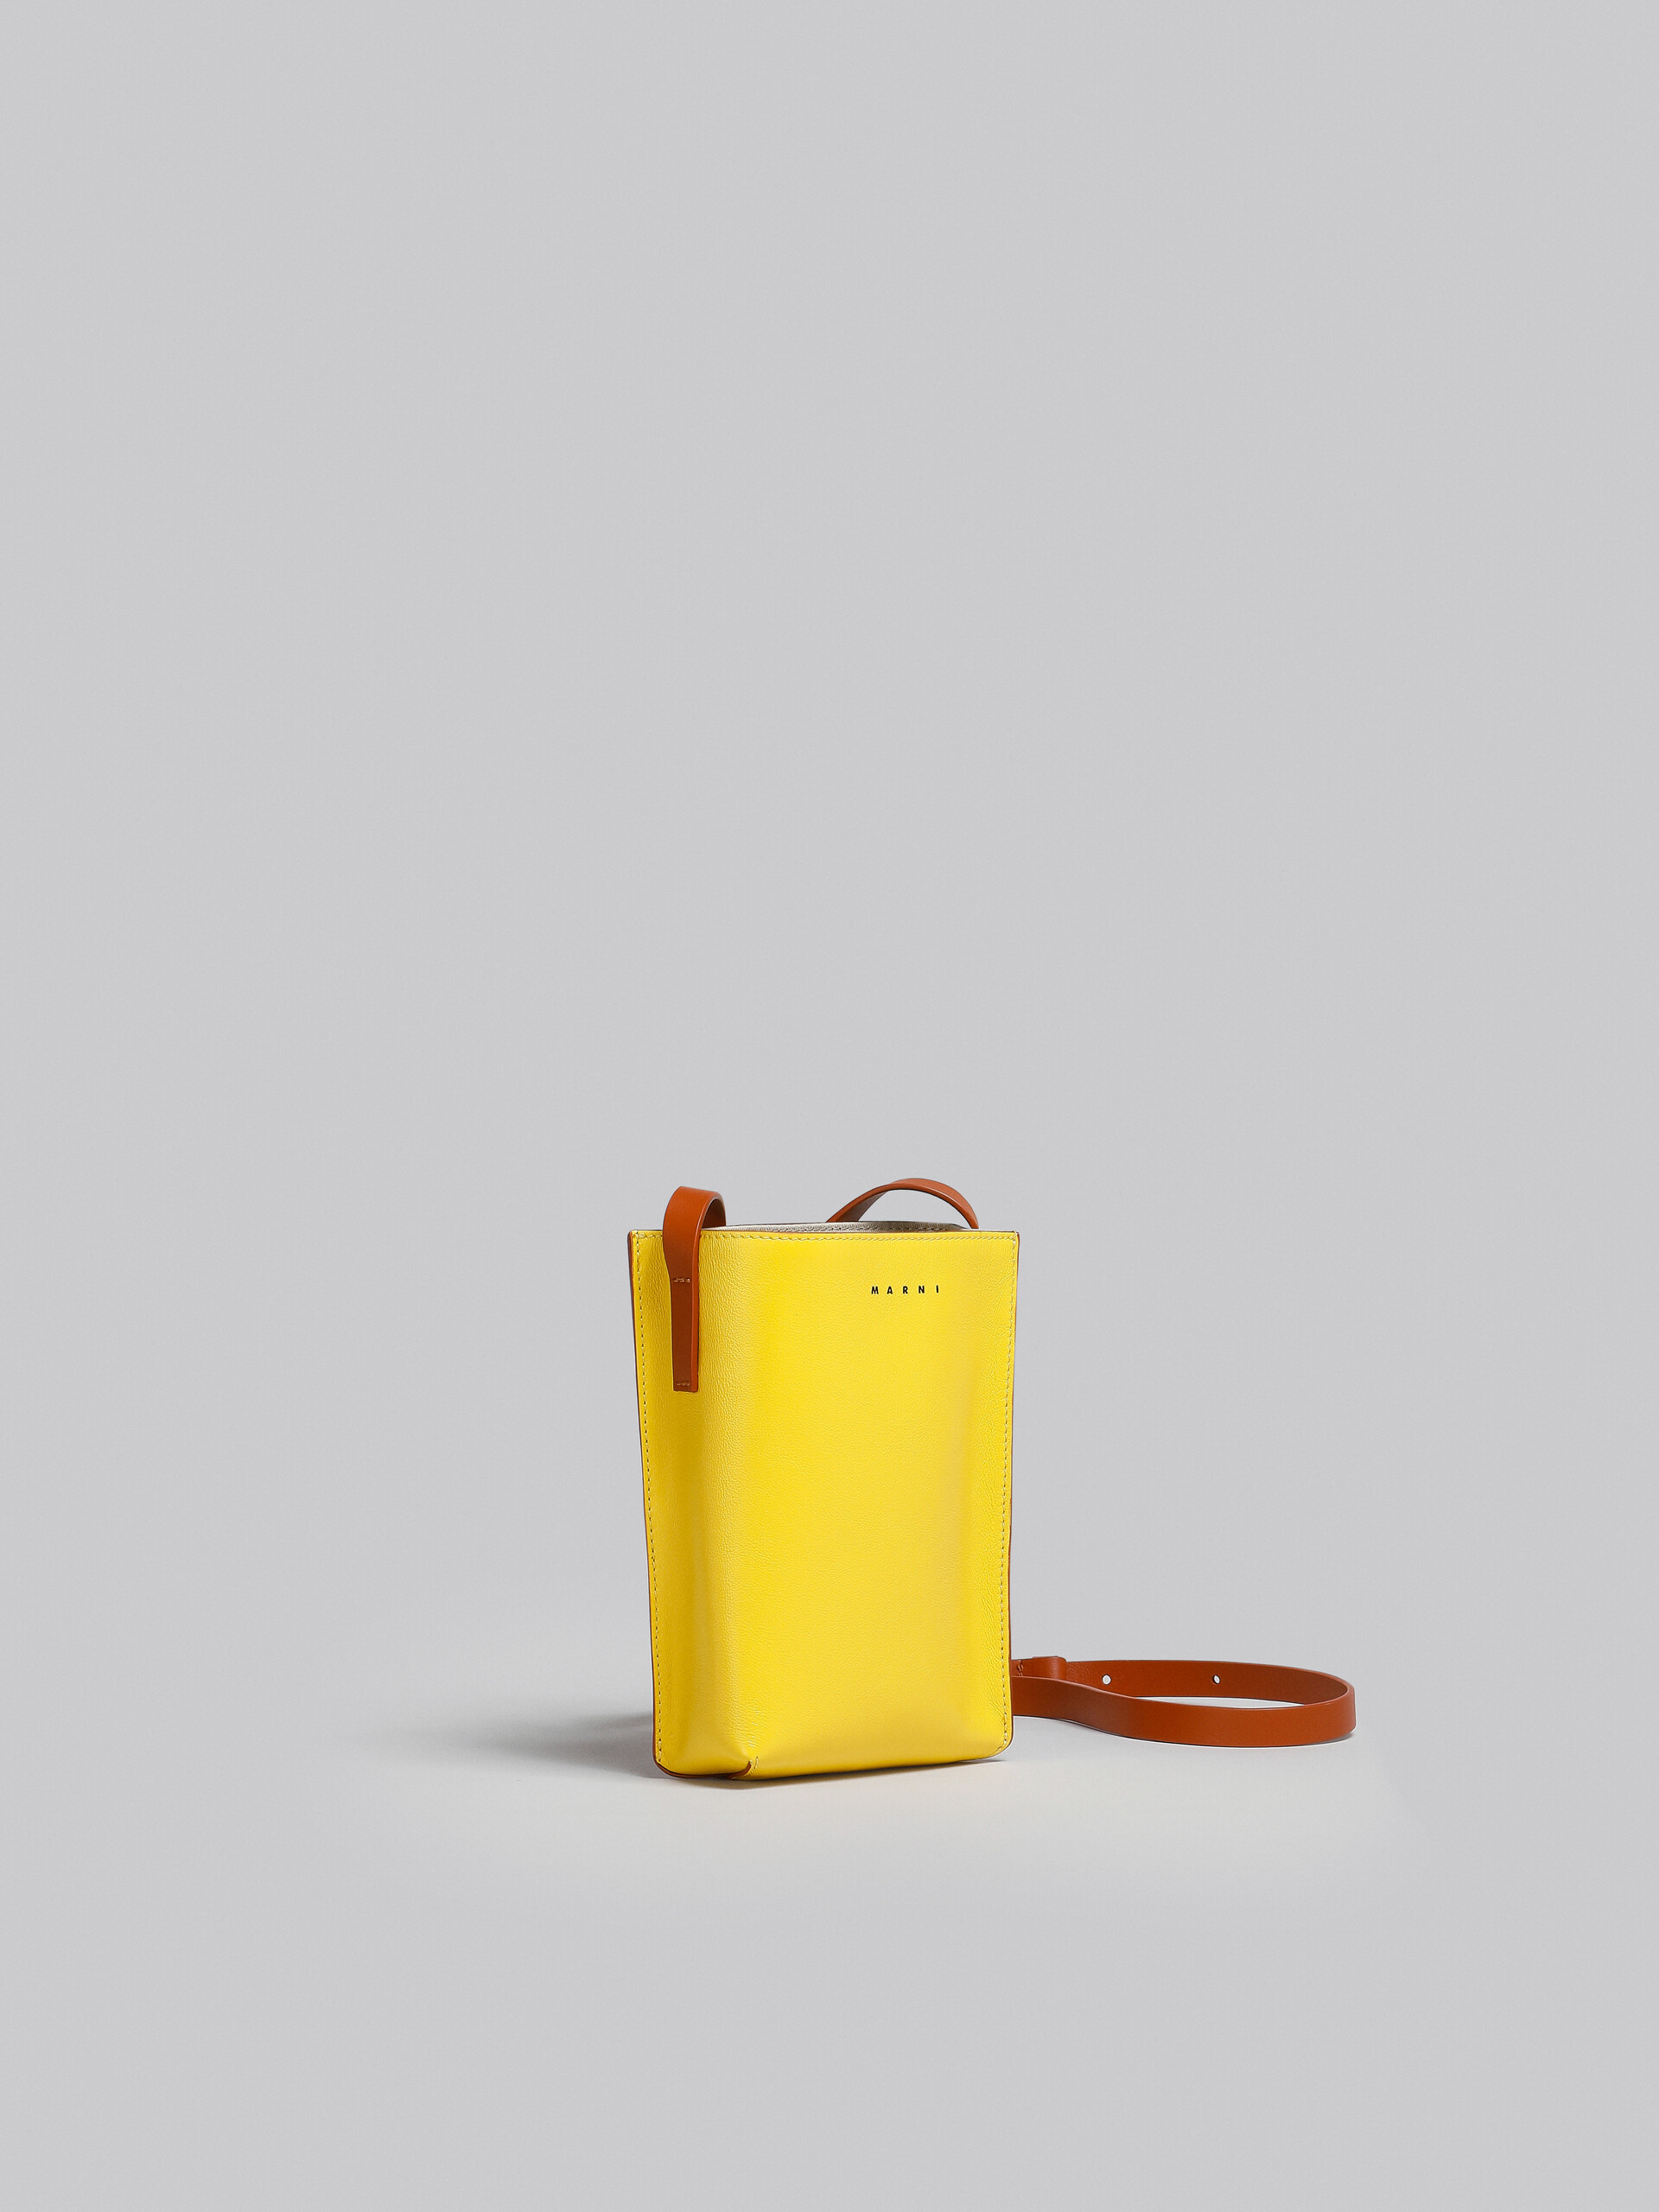 MUSEO SOFT small bag in brown and yellow leather - Shoulder Bags - Image 6